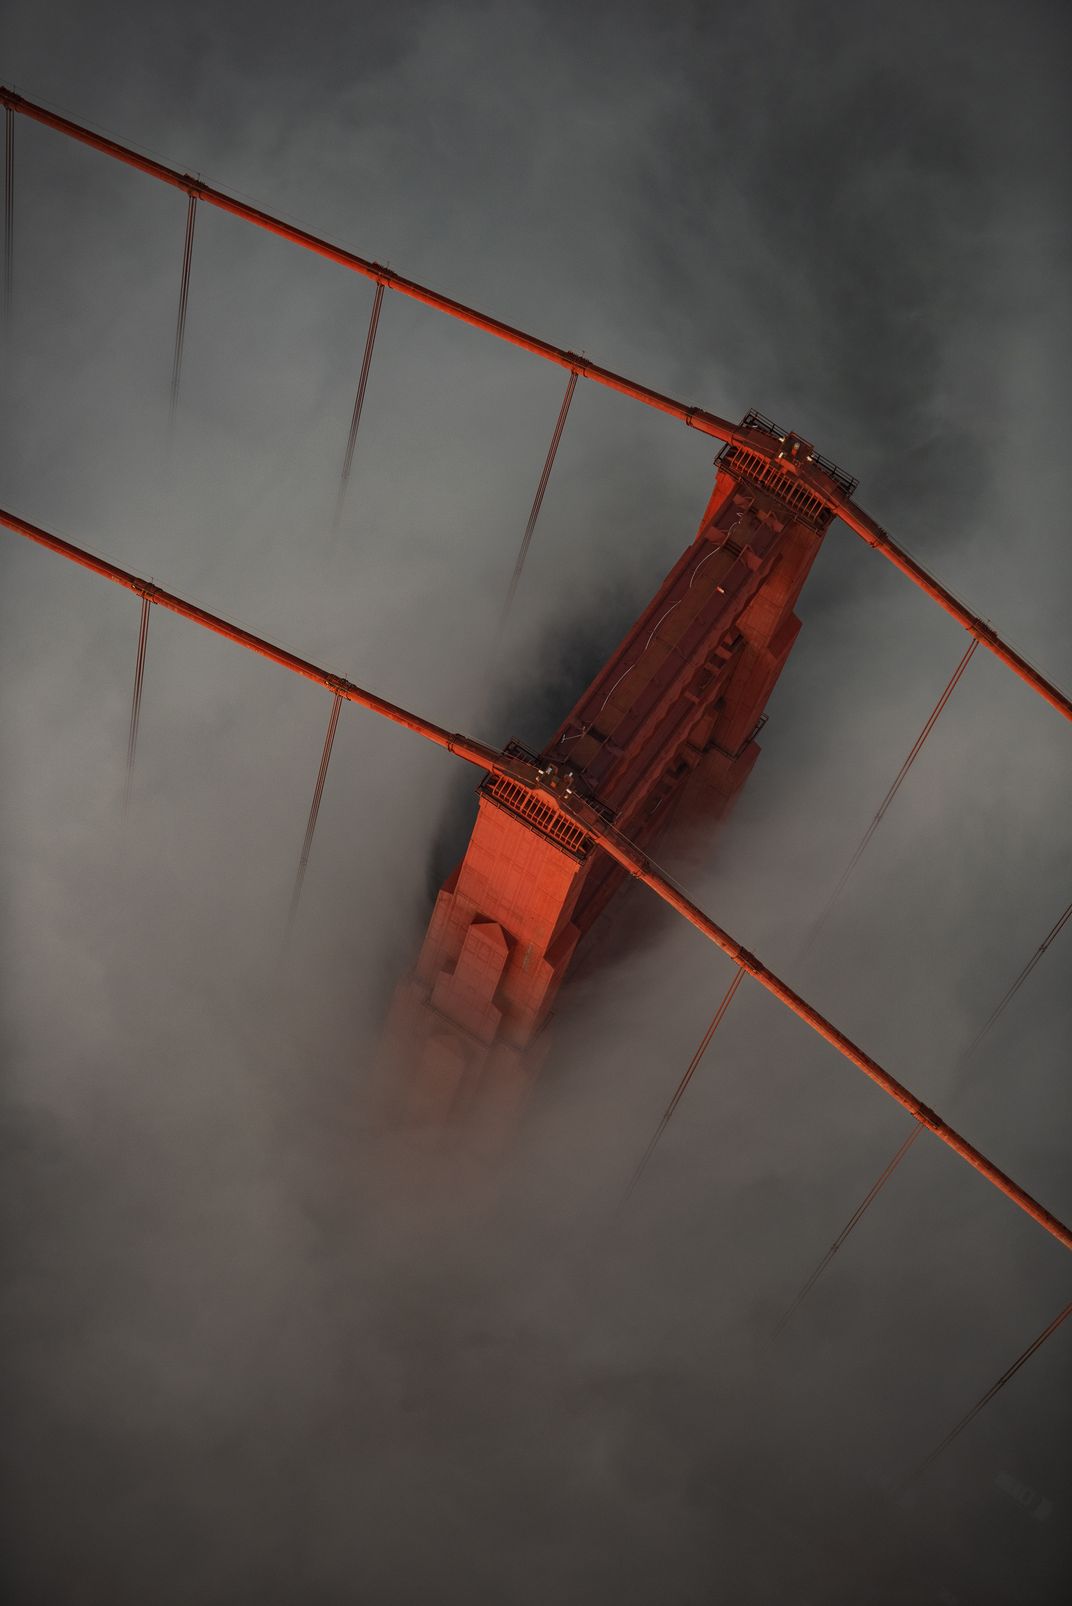 5 - San Francisco’s Golden Gate Bridge, opened in 1937, makes a magical appearance during a late afternoon summer fog.